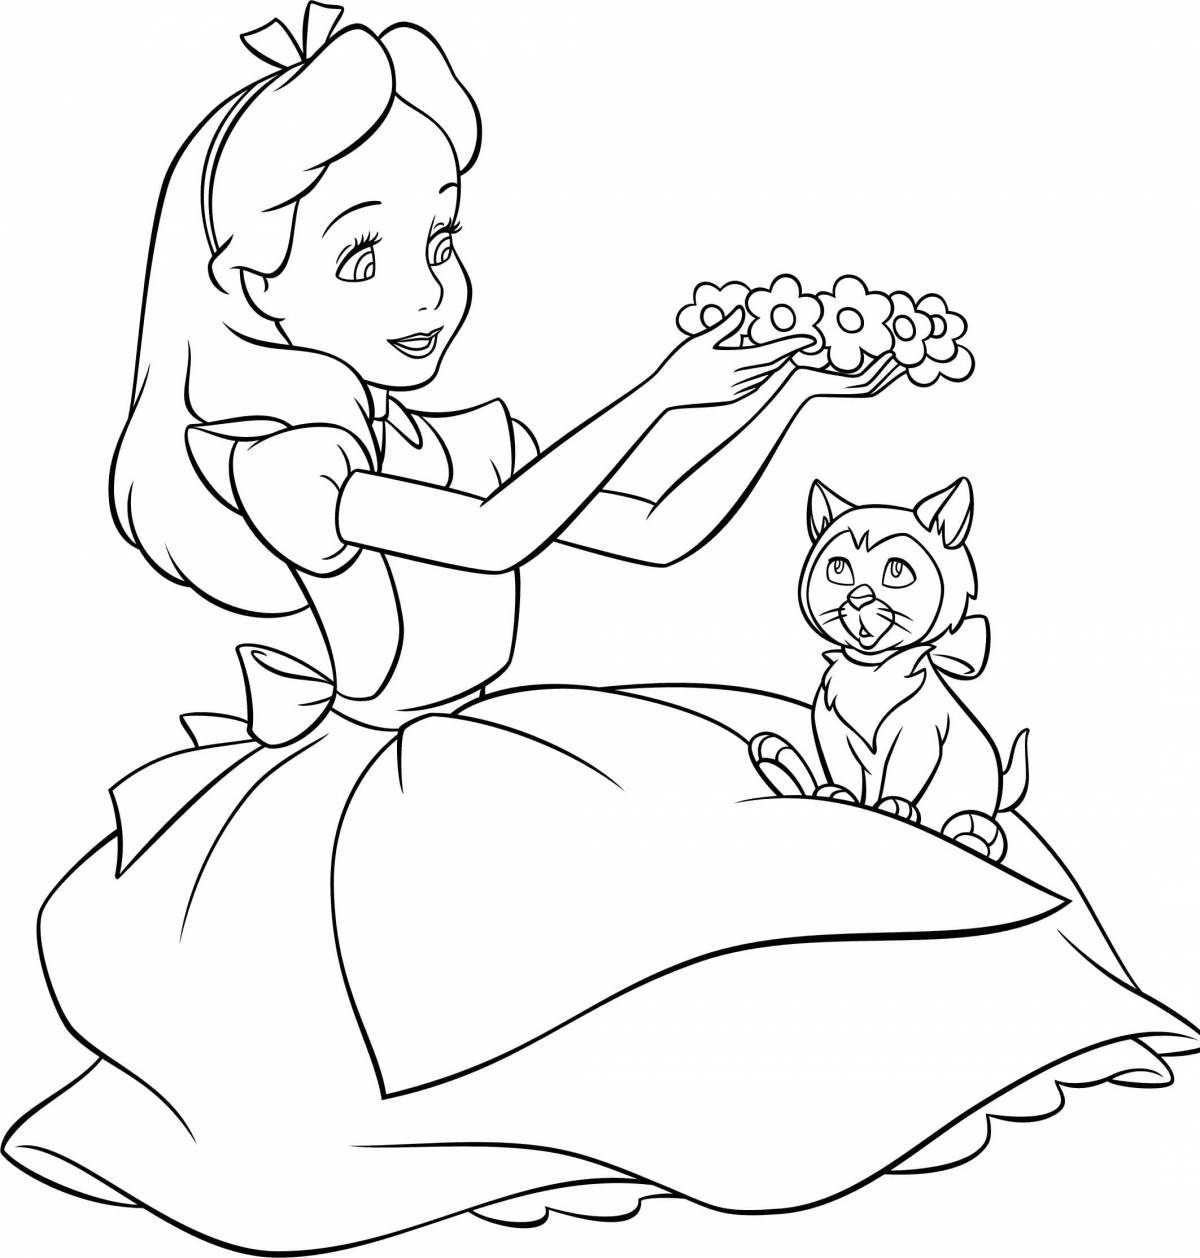 Jolly alice find a coloring book